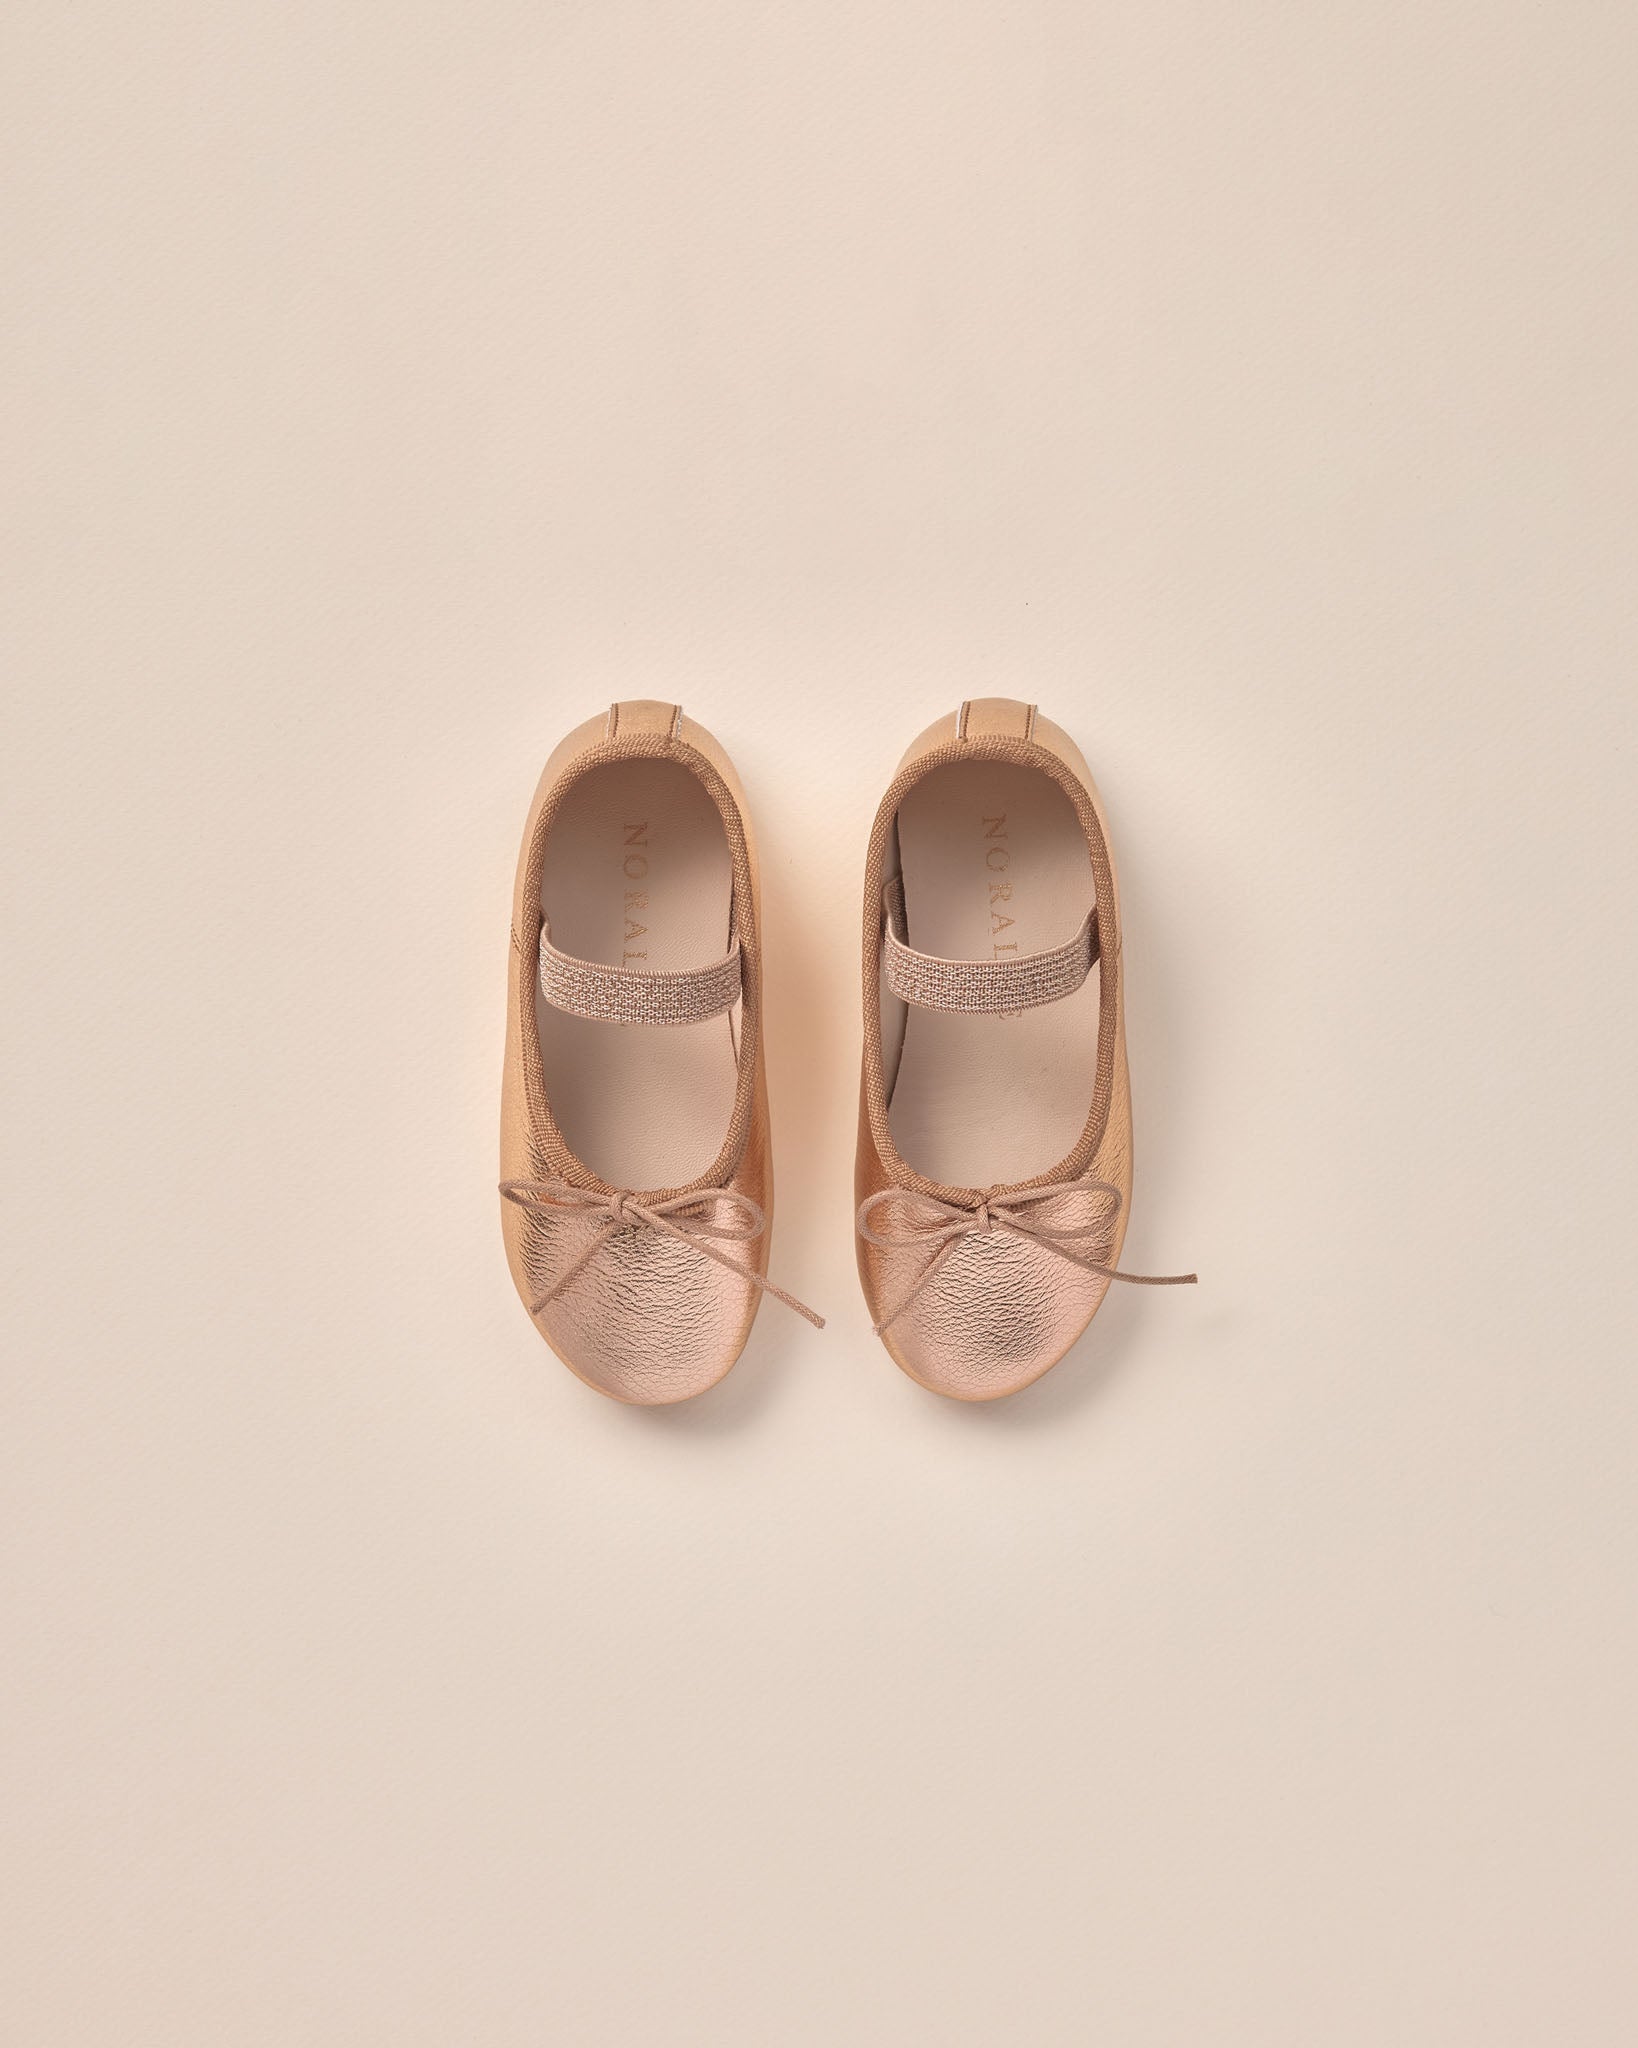 Ballet Flats || Rose Gold - Rylee + Cru | Kids Clothes | Trendy Baby Clothes | Modern Infant Outfits |